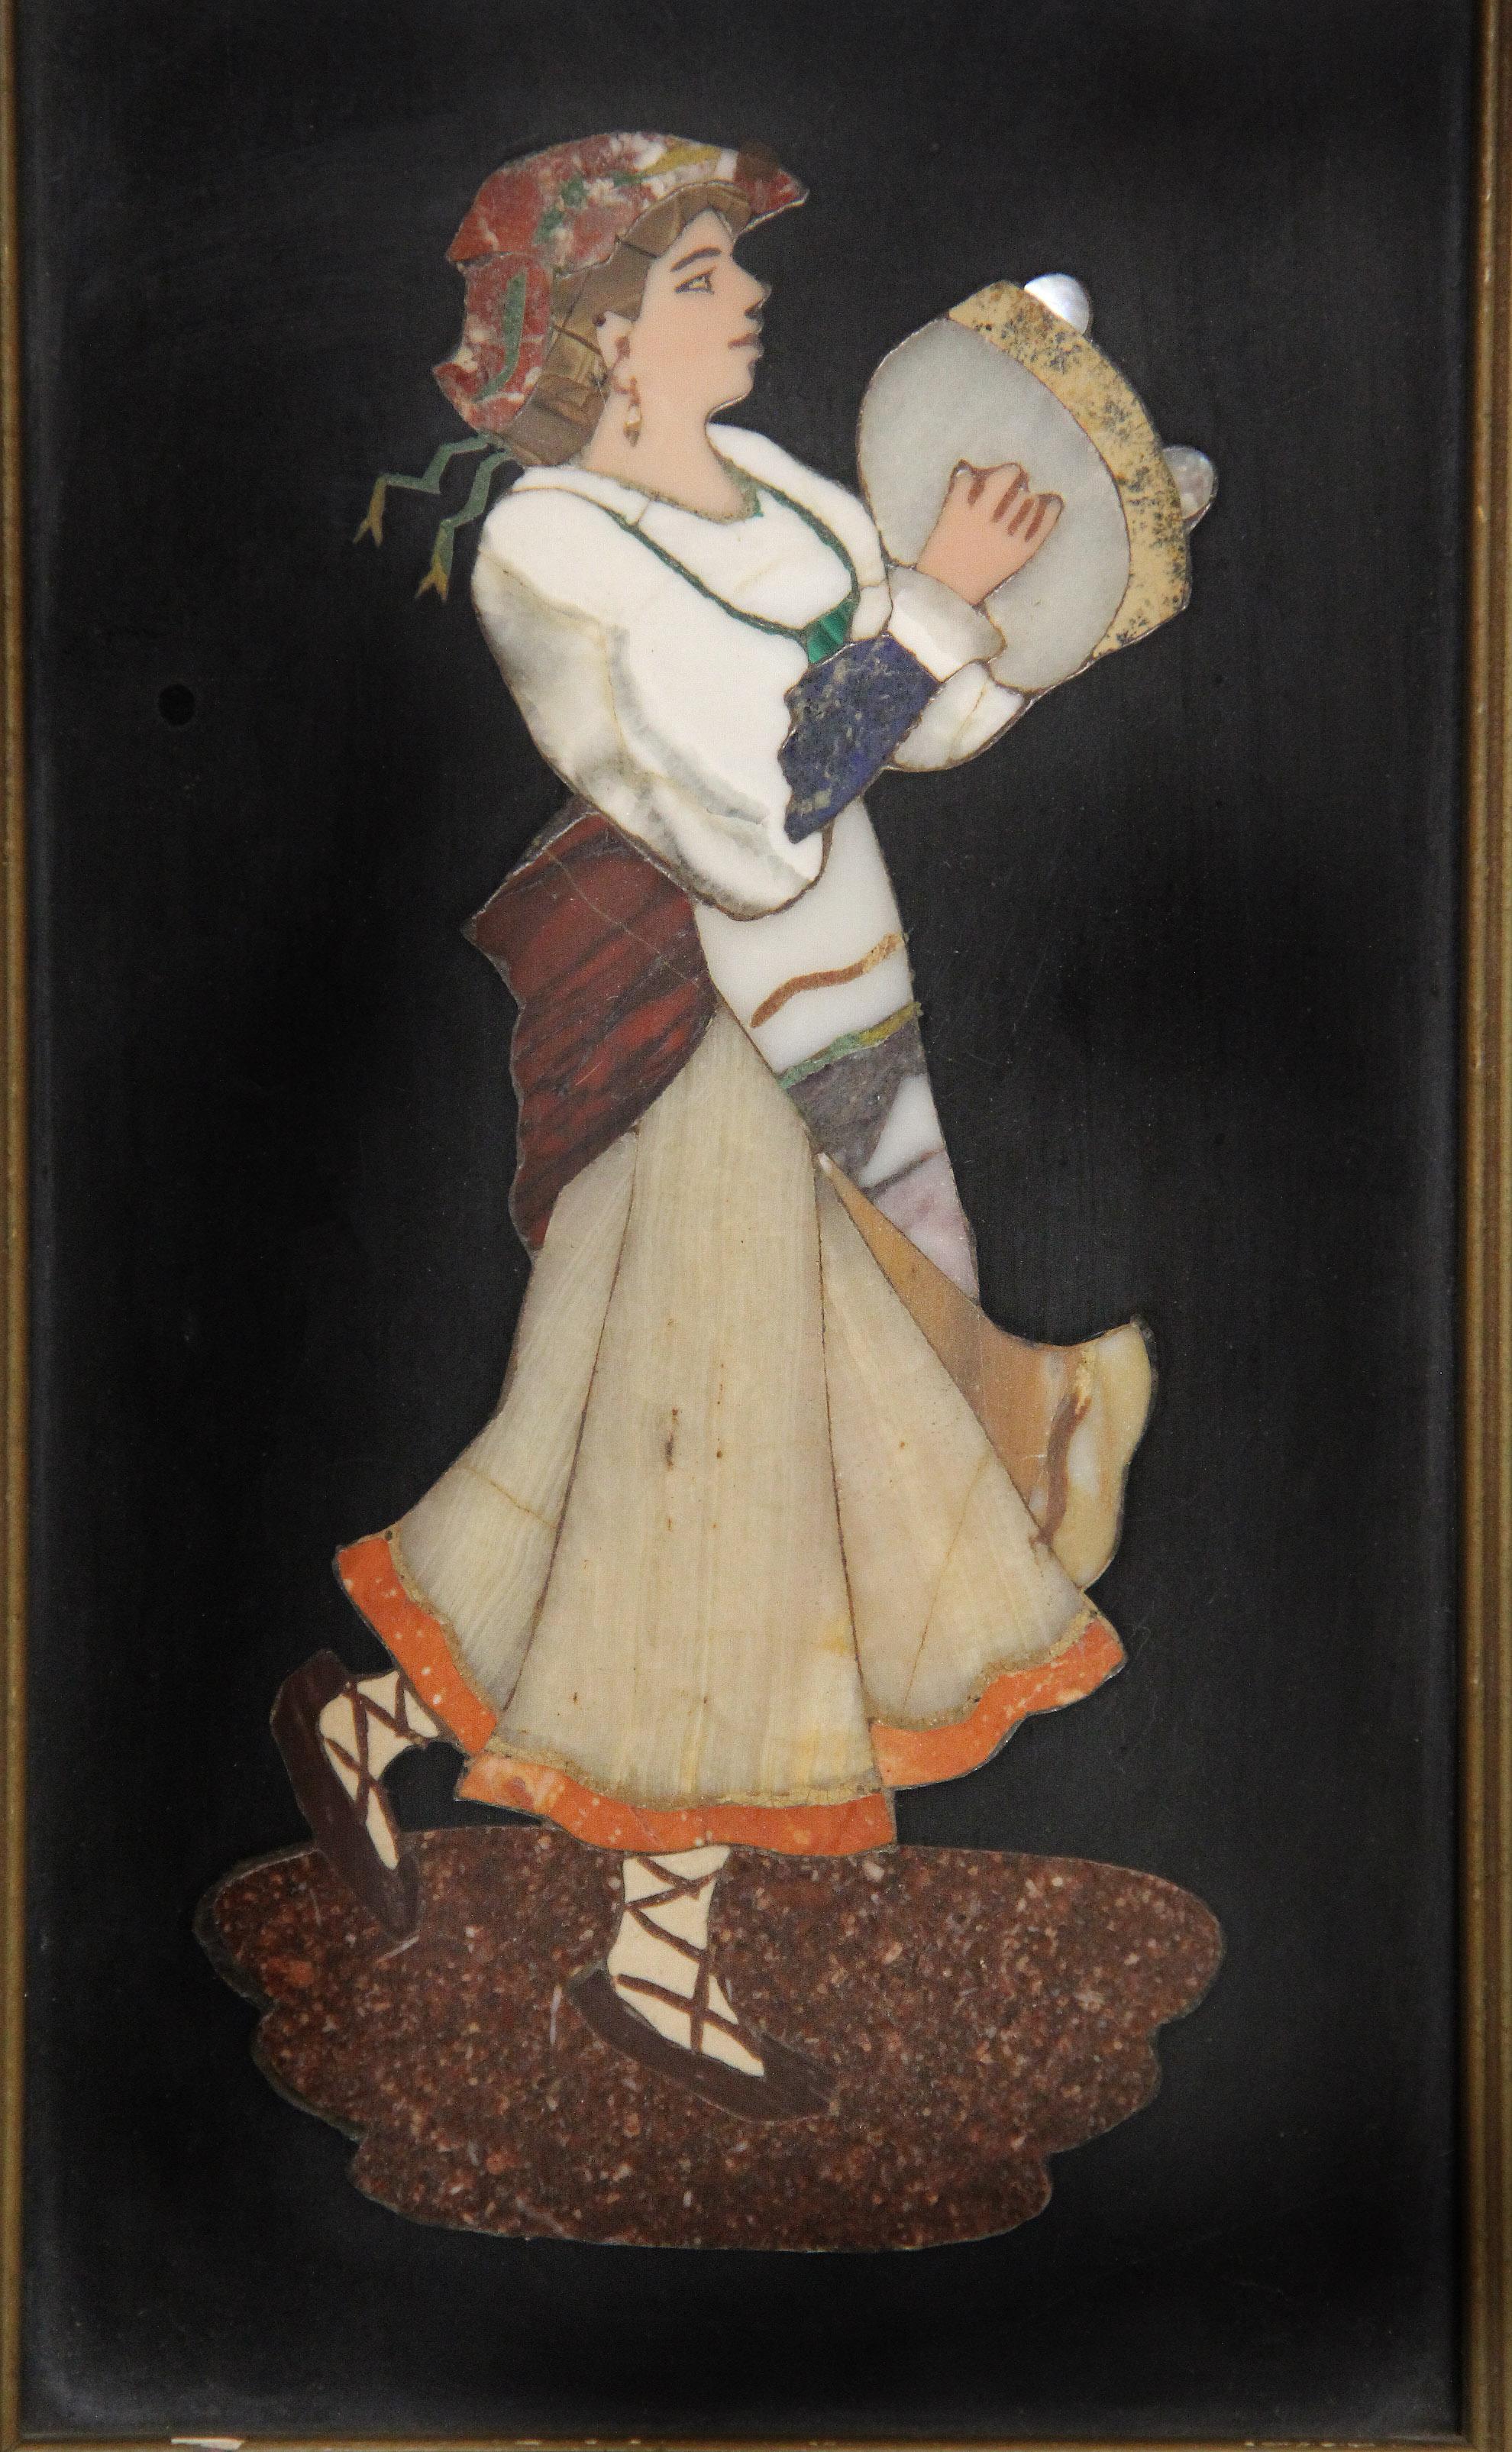 A Nice pair of late 19th/early 20th century Italian Pietra Dura plaques

Depicting a male and female musician. Beautifully designed with Marble, Lapis, Malachite, Porphyry, Quartz and Agate, among other stones.

Plaque:
Height – 8.5 inches /